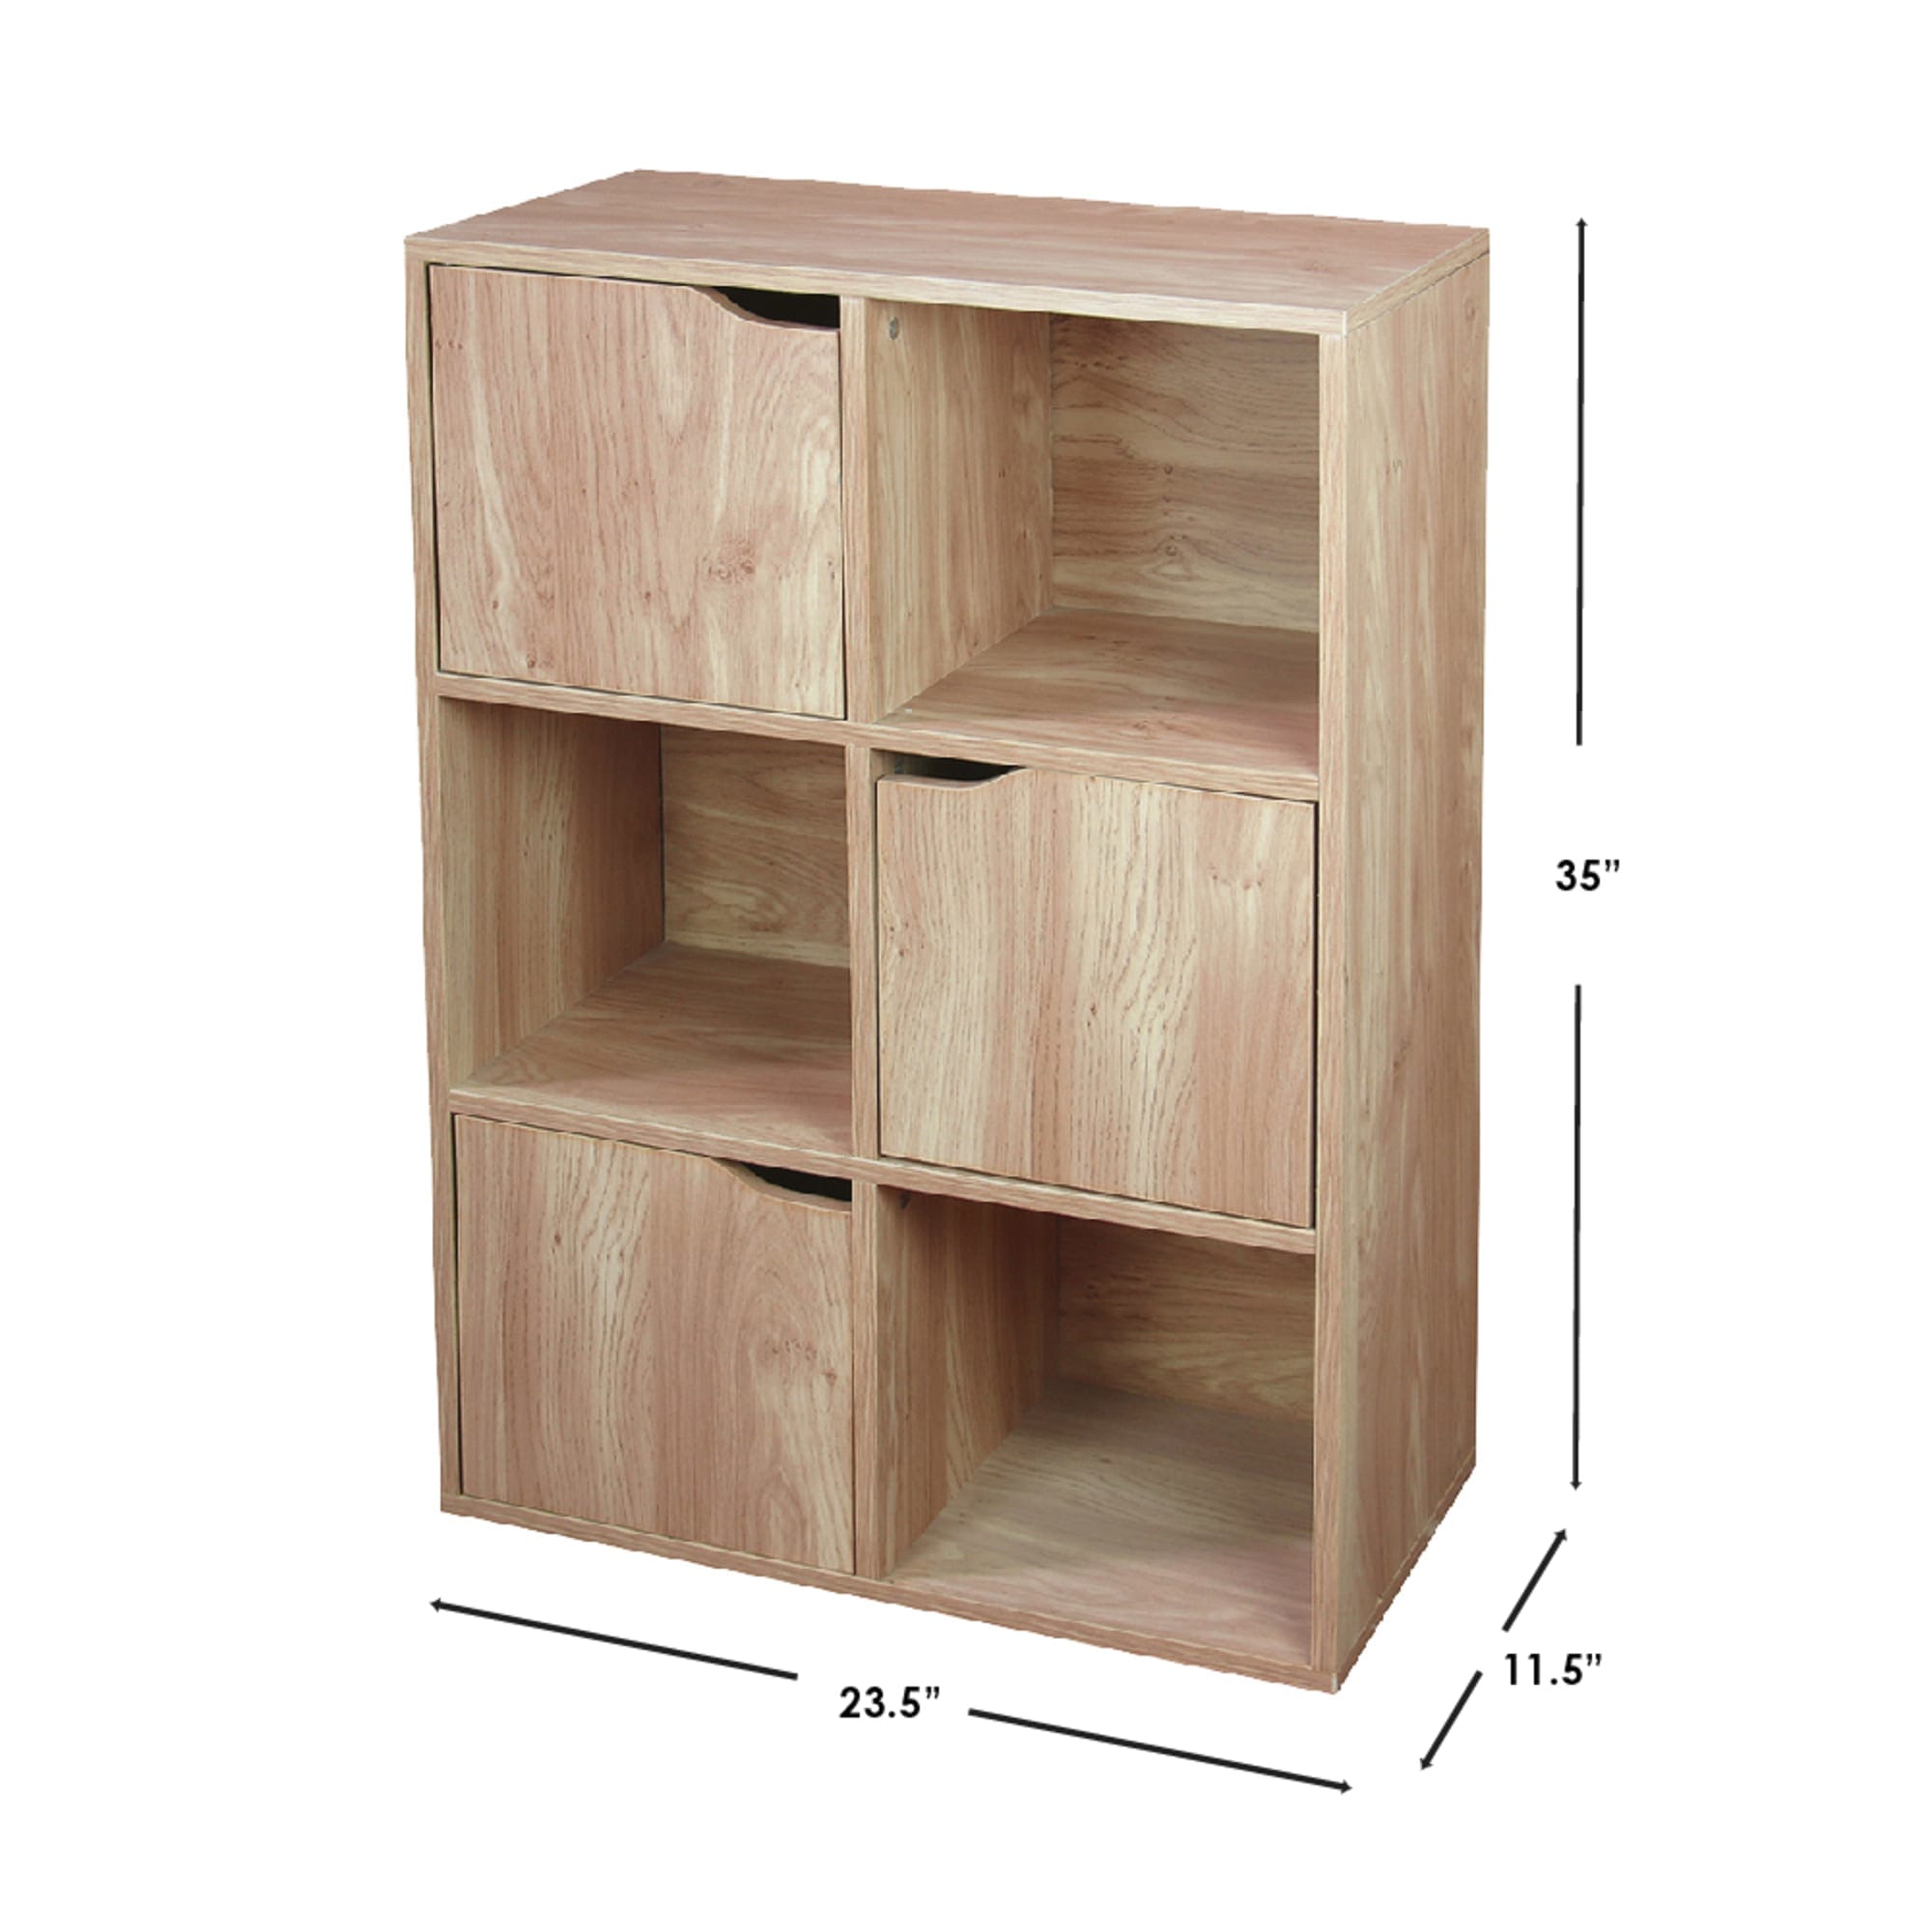 Home Basics 6 Cube MDF Storage Shelf with Doors, Natural $60.00 EACH, CASE PACK OF 1